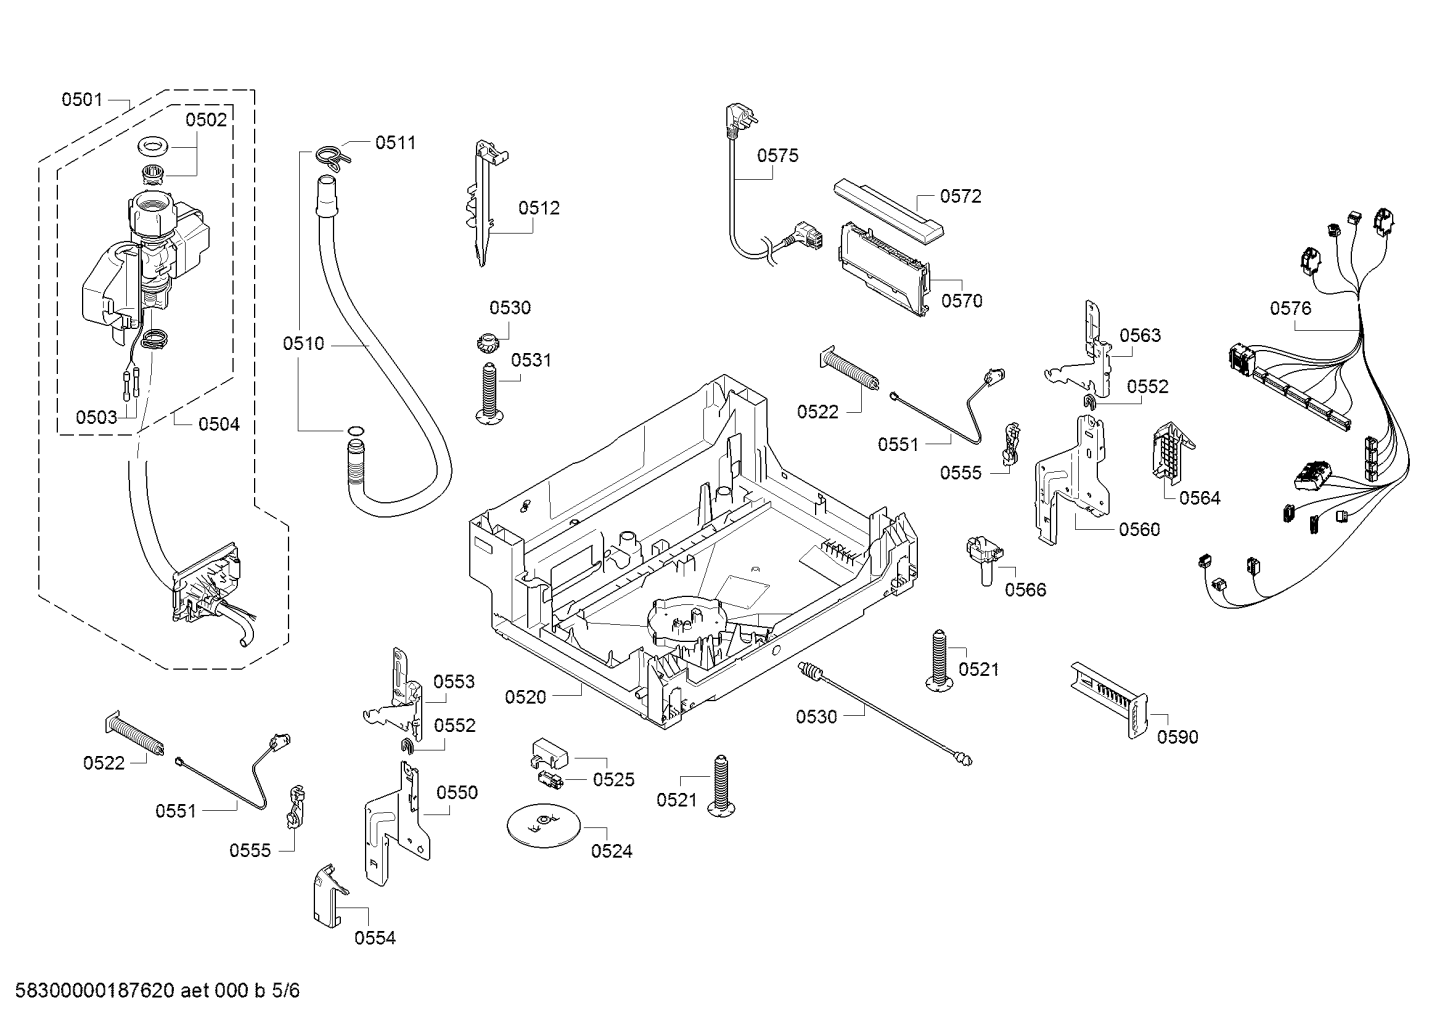 drawing_link_5_device_1735452